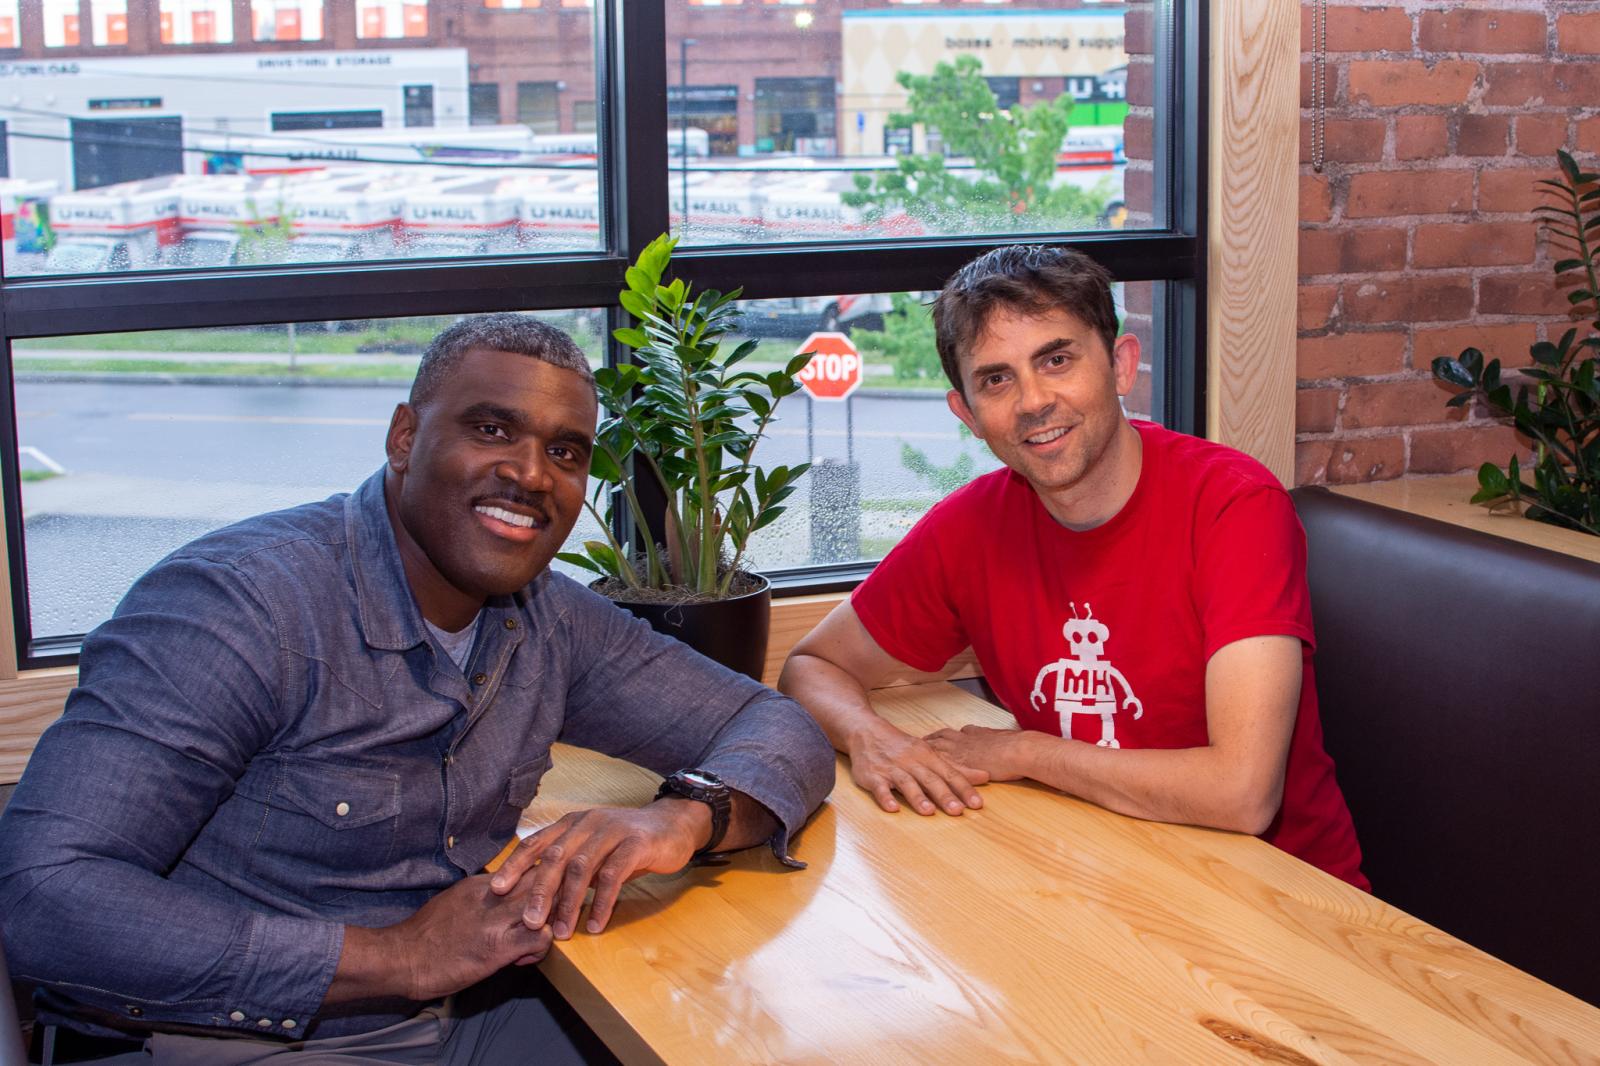 Two people sitting at a table, smiling. On the left is Brent Peterkin, a black man wearing a blue shirt; on the right is J.R. Logan, a white man wearing a red shirt with a MakeHaven robot on it.